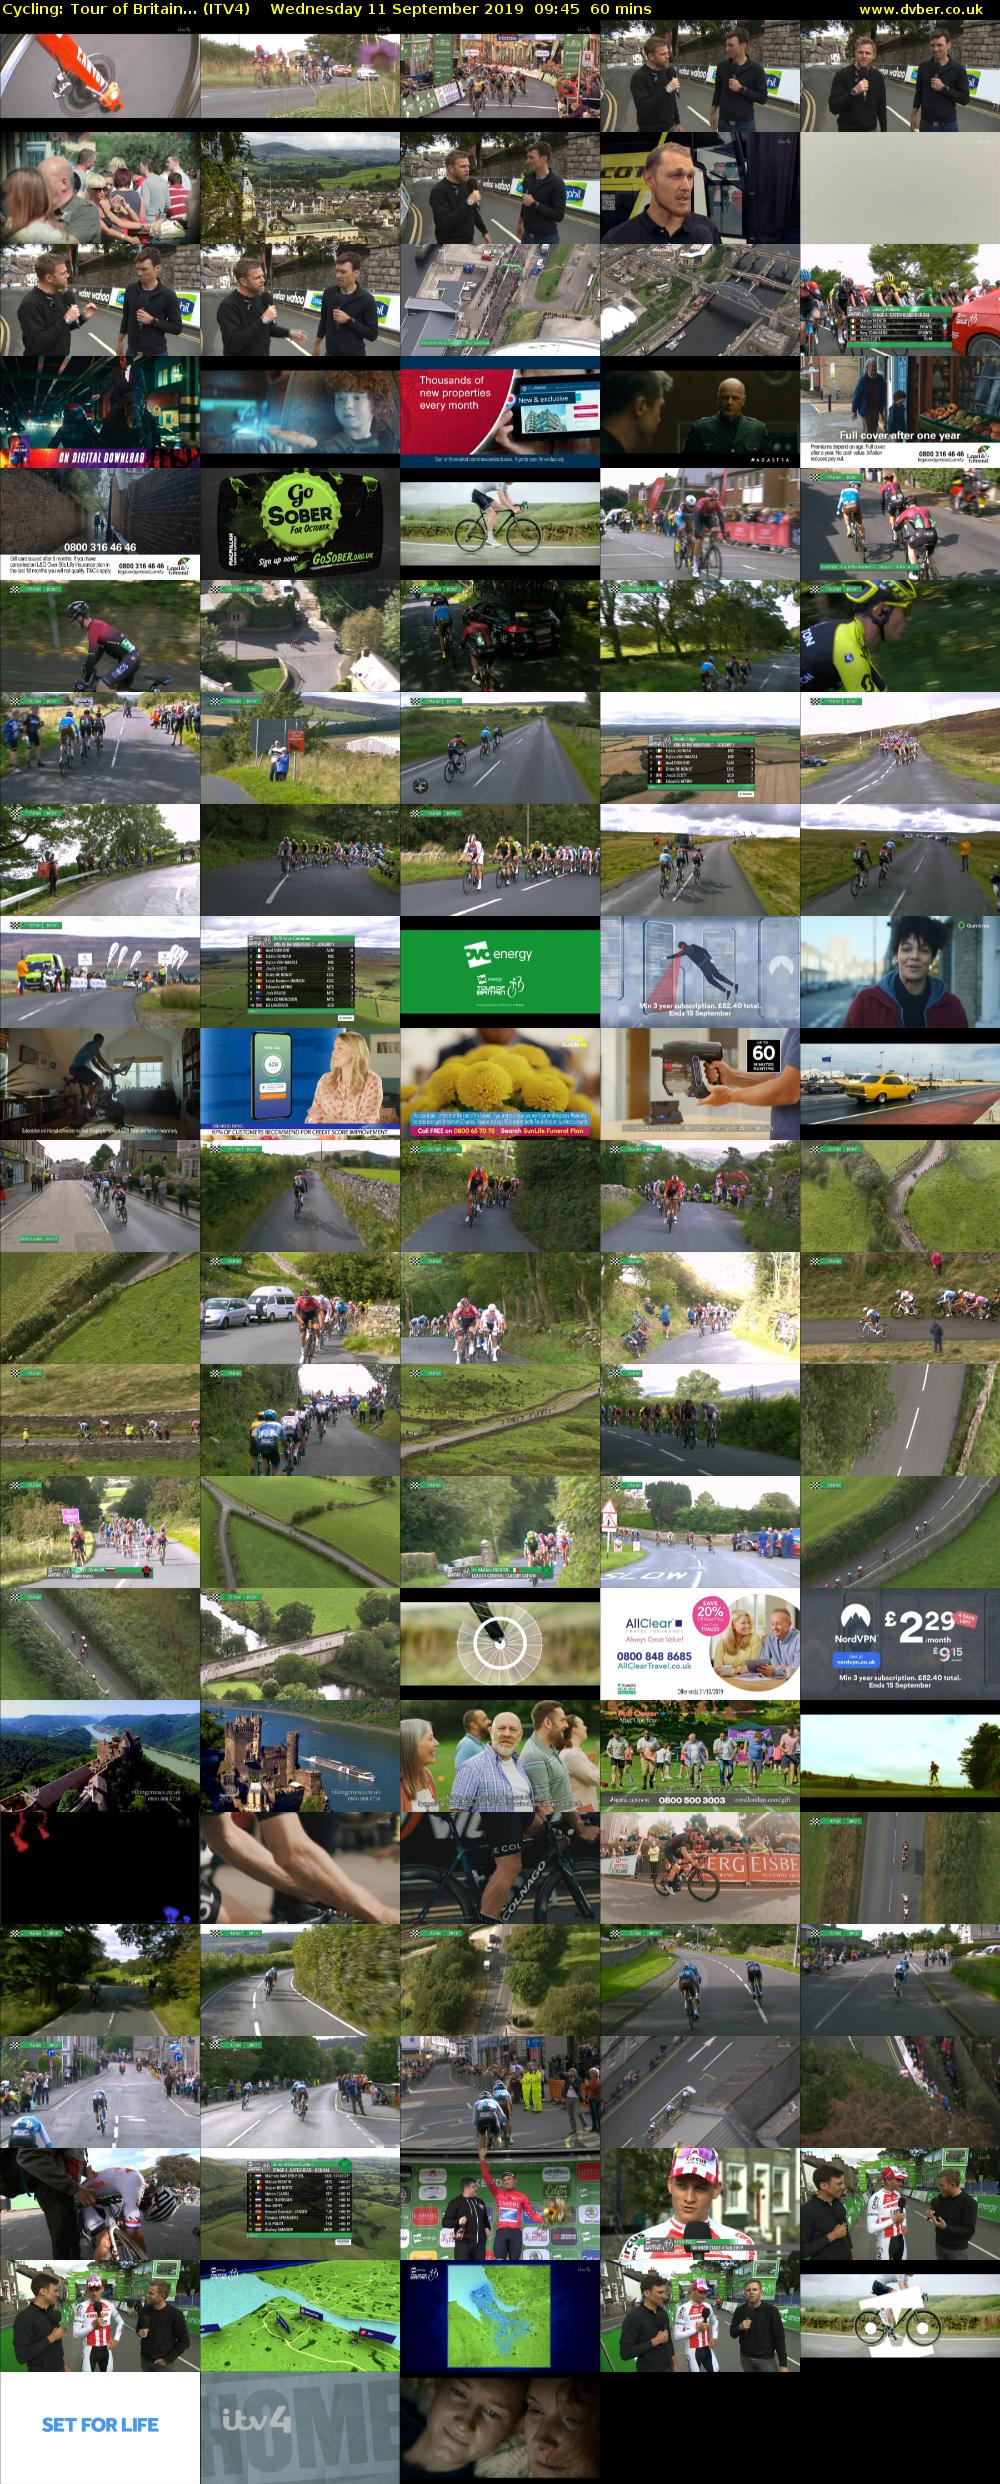 Cycling: Tour of Britain... (ITV4) Wednesday 11 September 2019 09:45 - 10:45